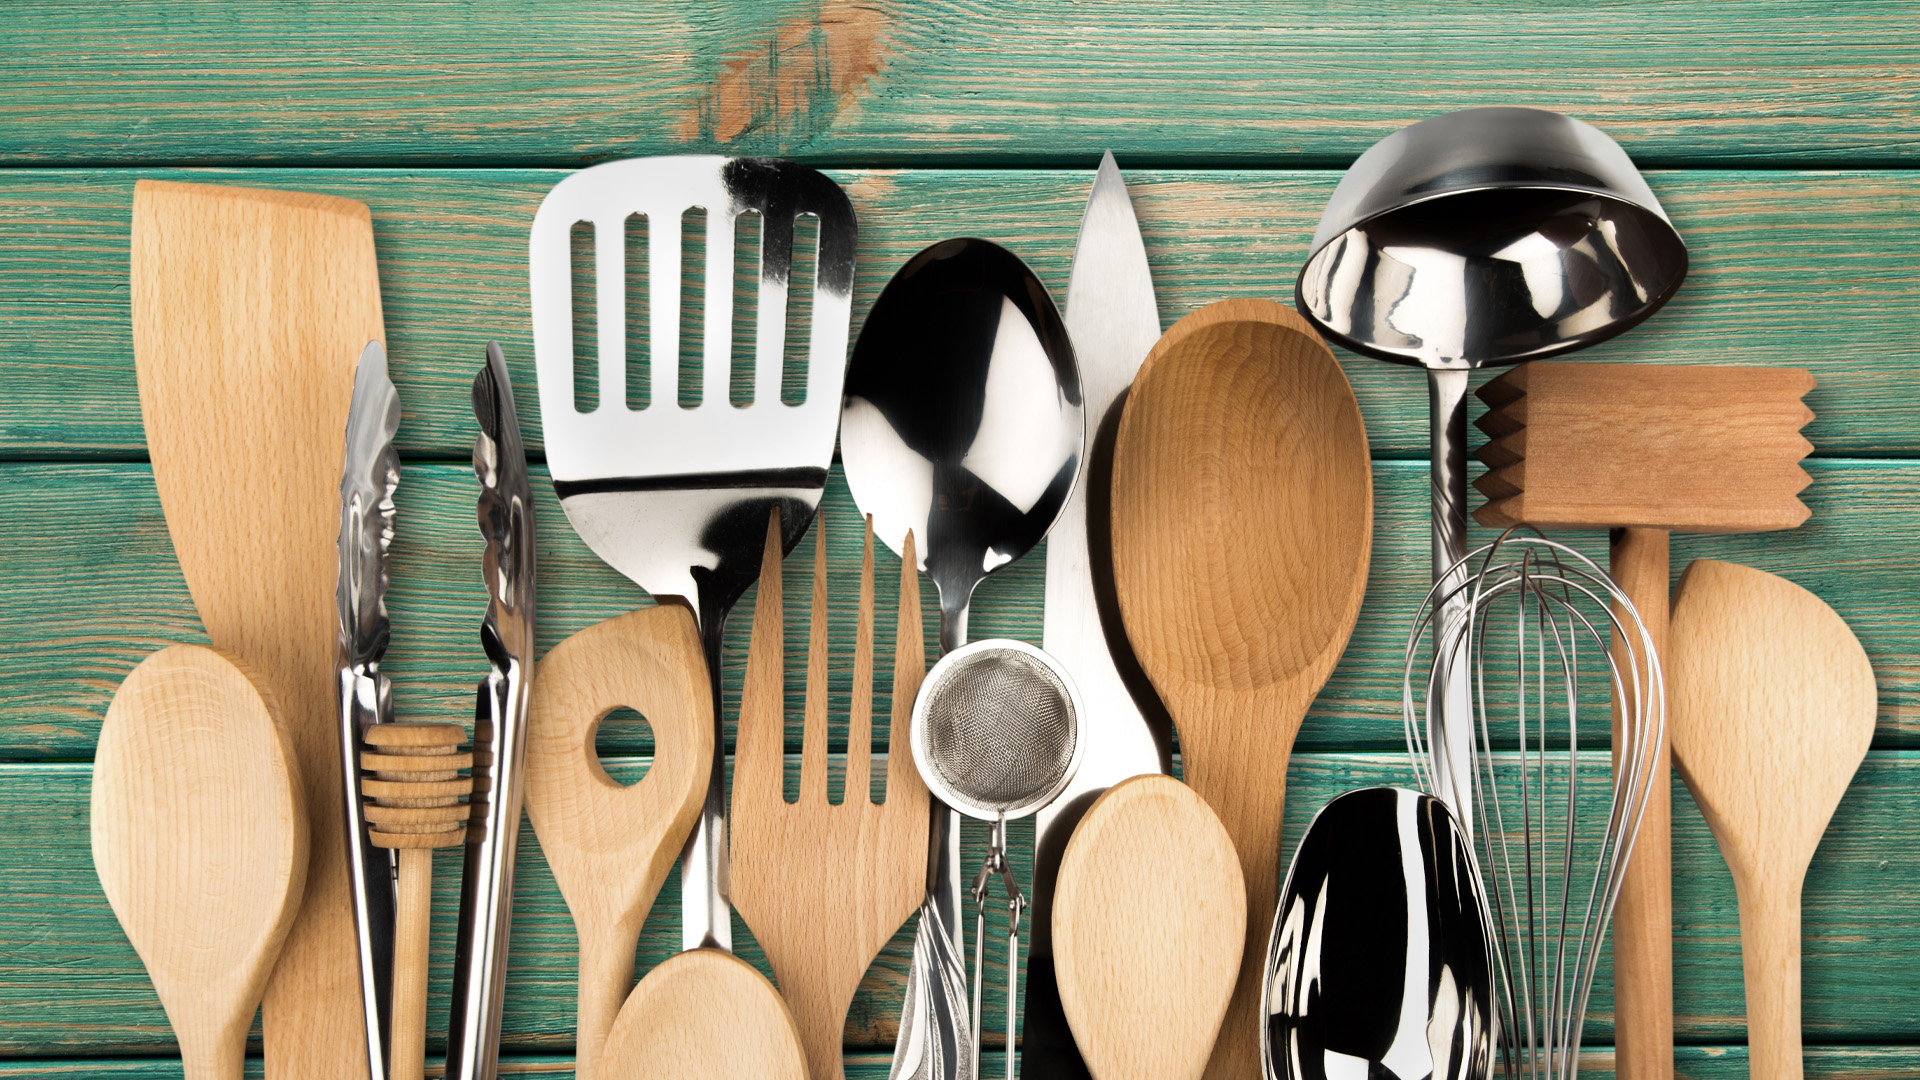 Must Have Kitchen Tools and Gadgets for the Healthy Cook